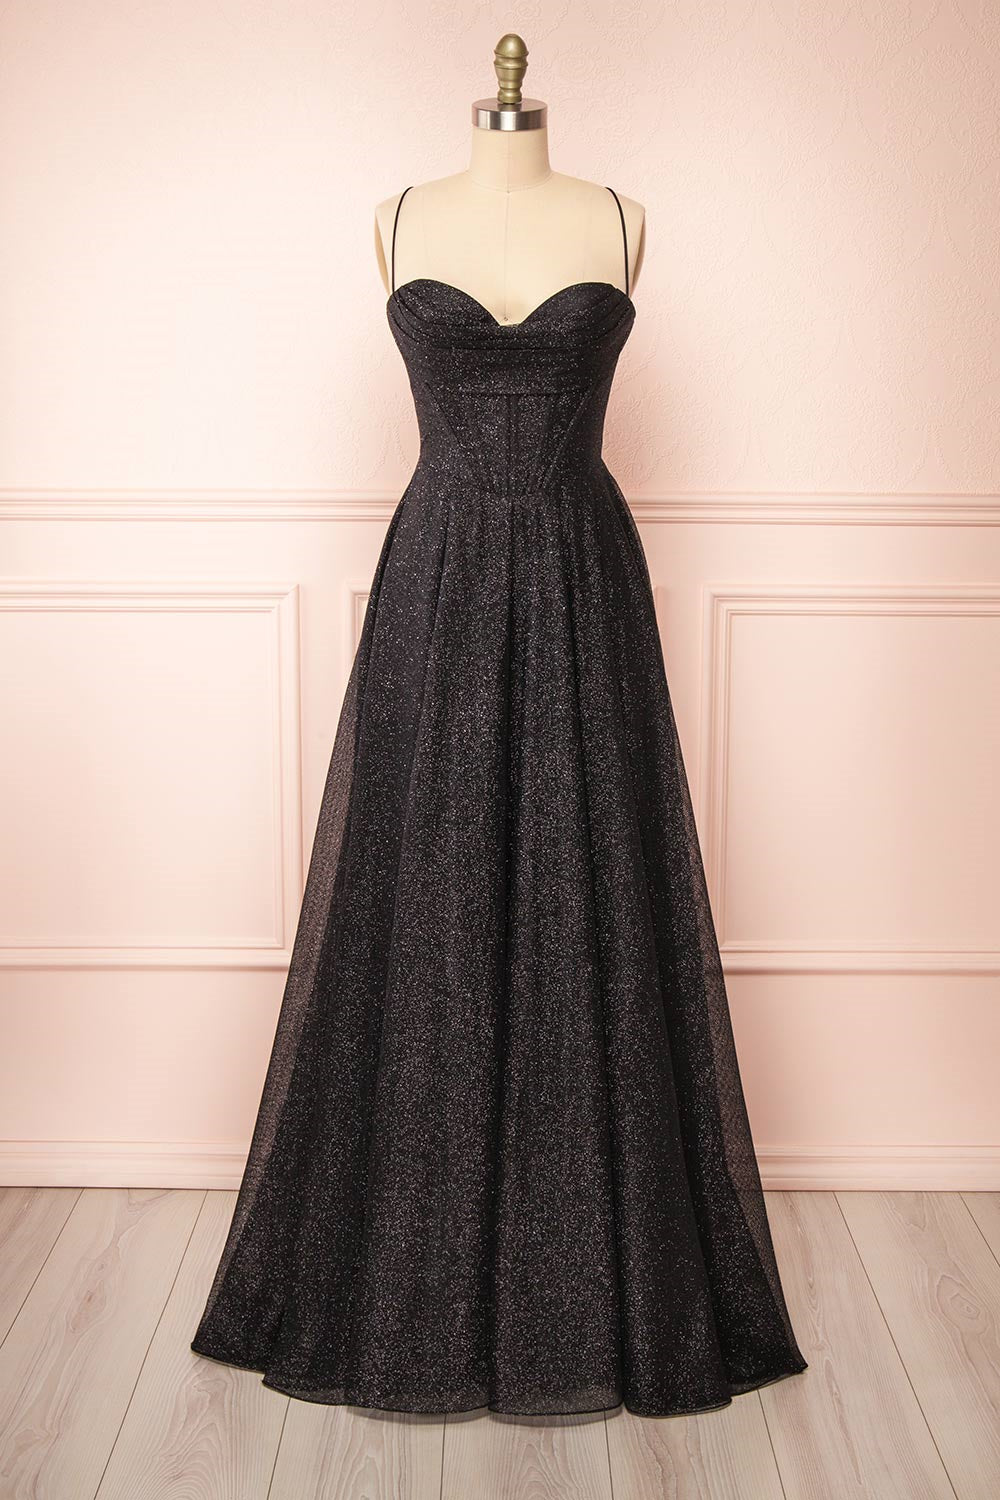 Sparkly Black Lace-Up A-line Sweetheart Long Prom Dress